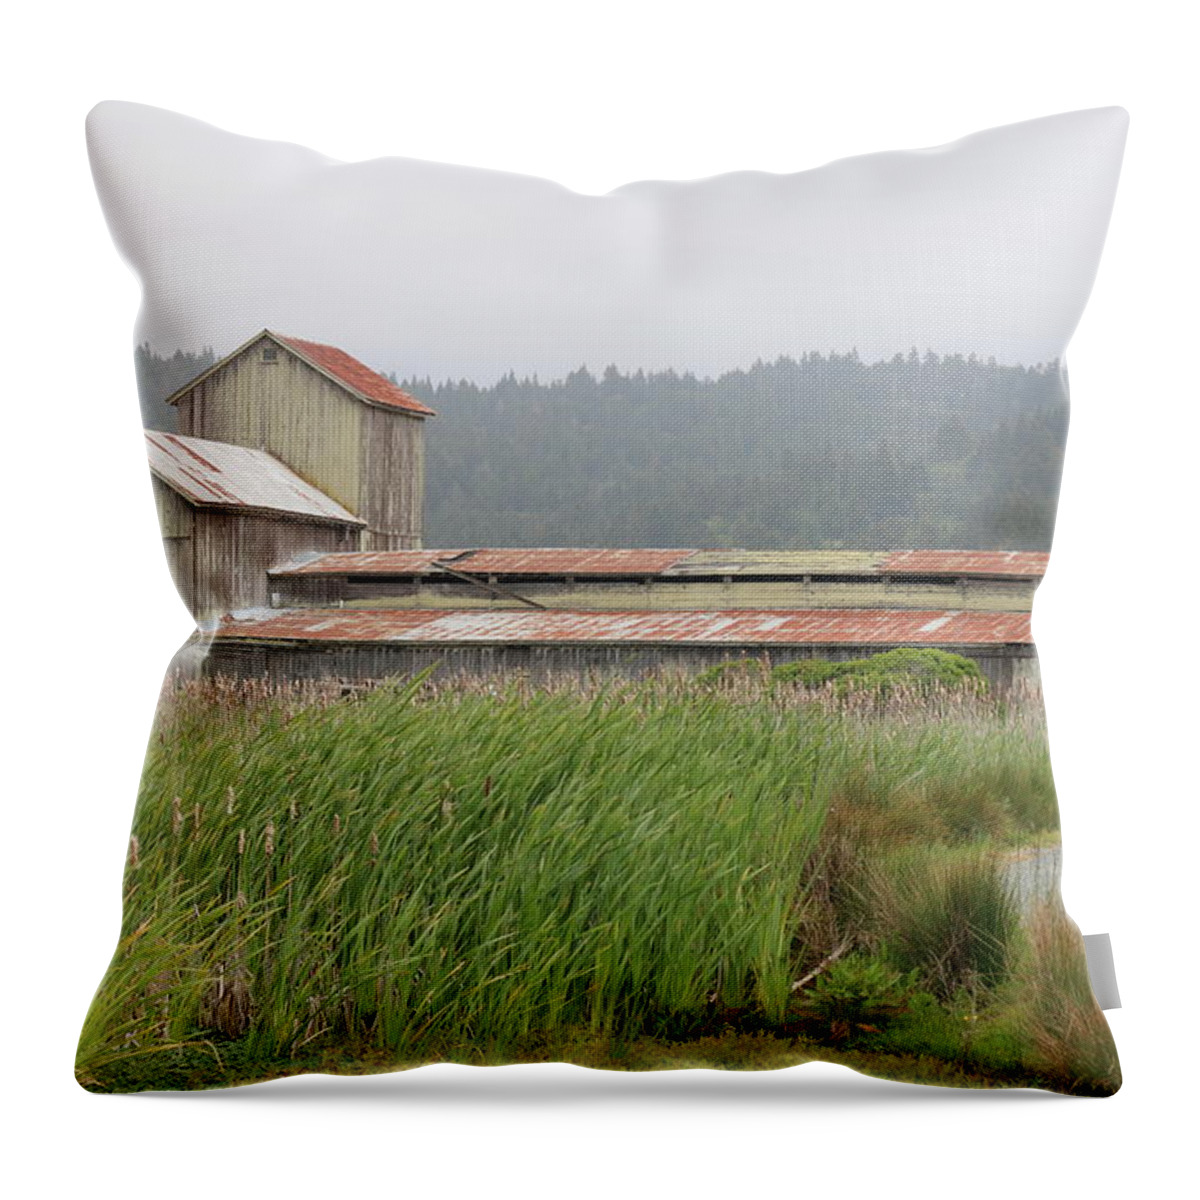 Barn Throw Pillow featuring the photograph Barn by Christy Pooschke